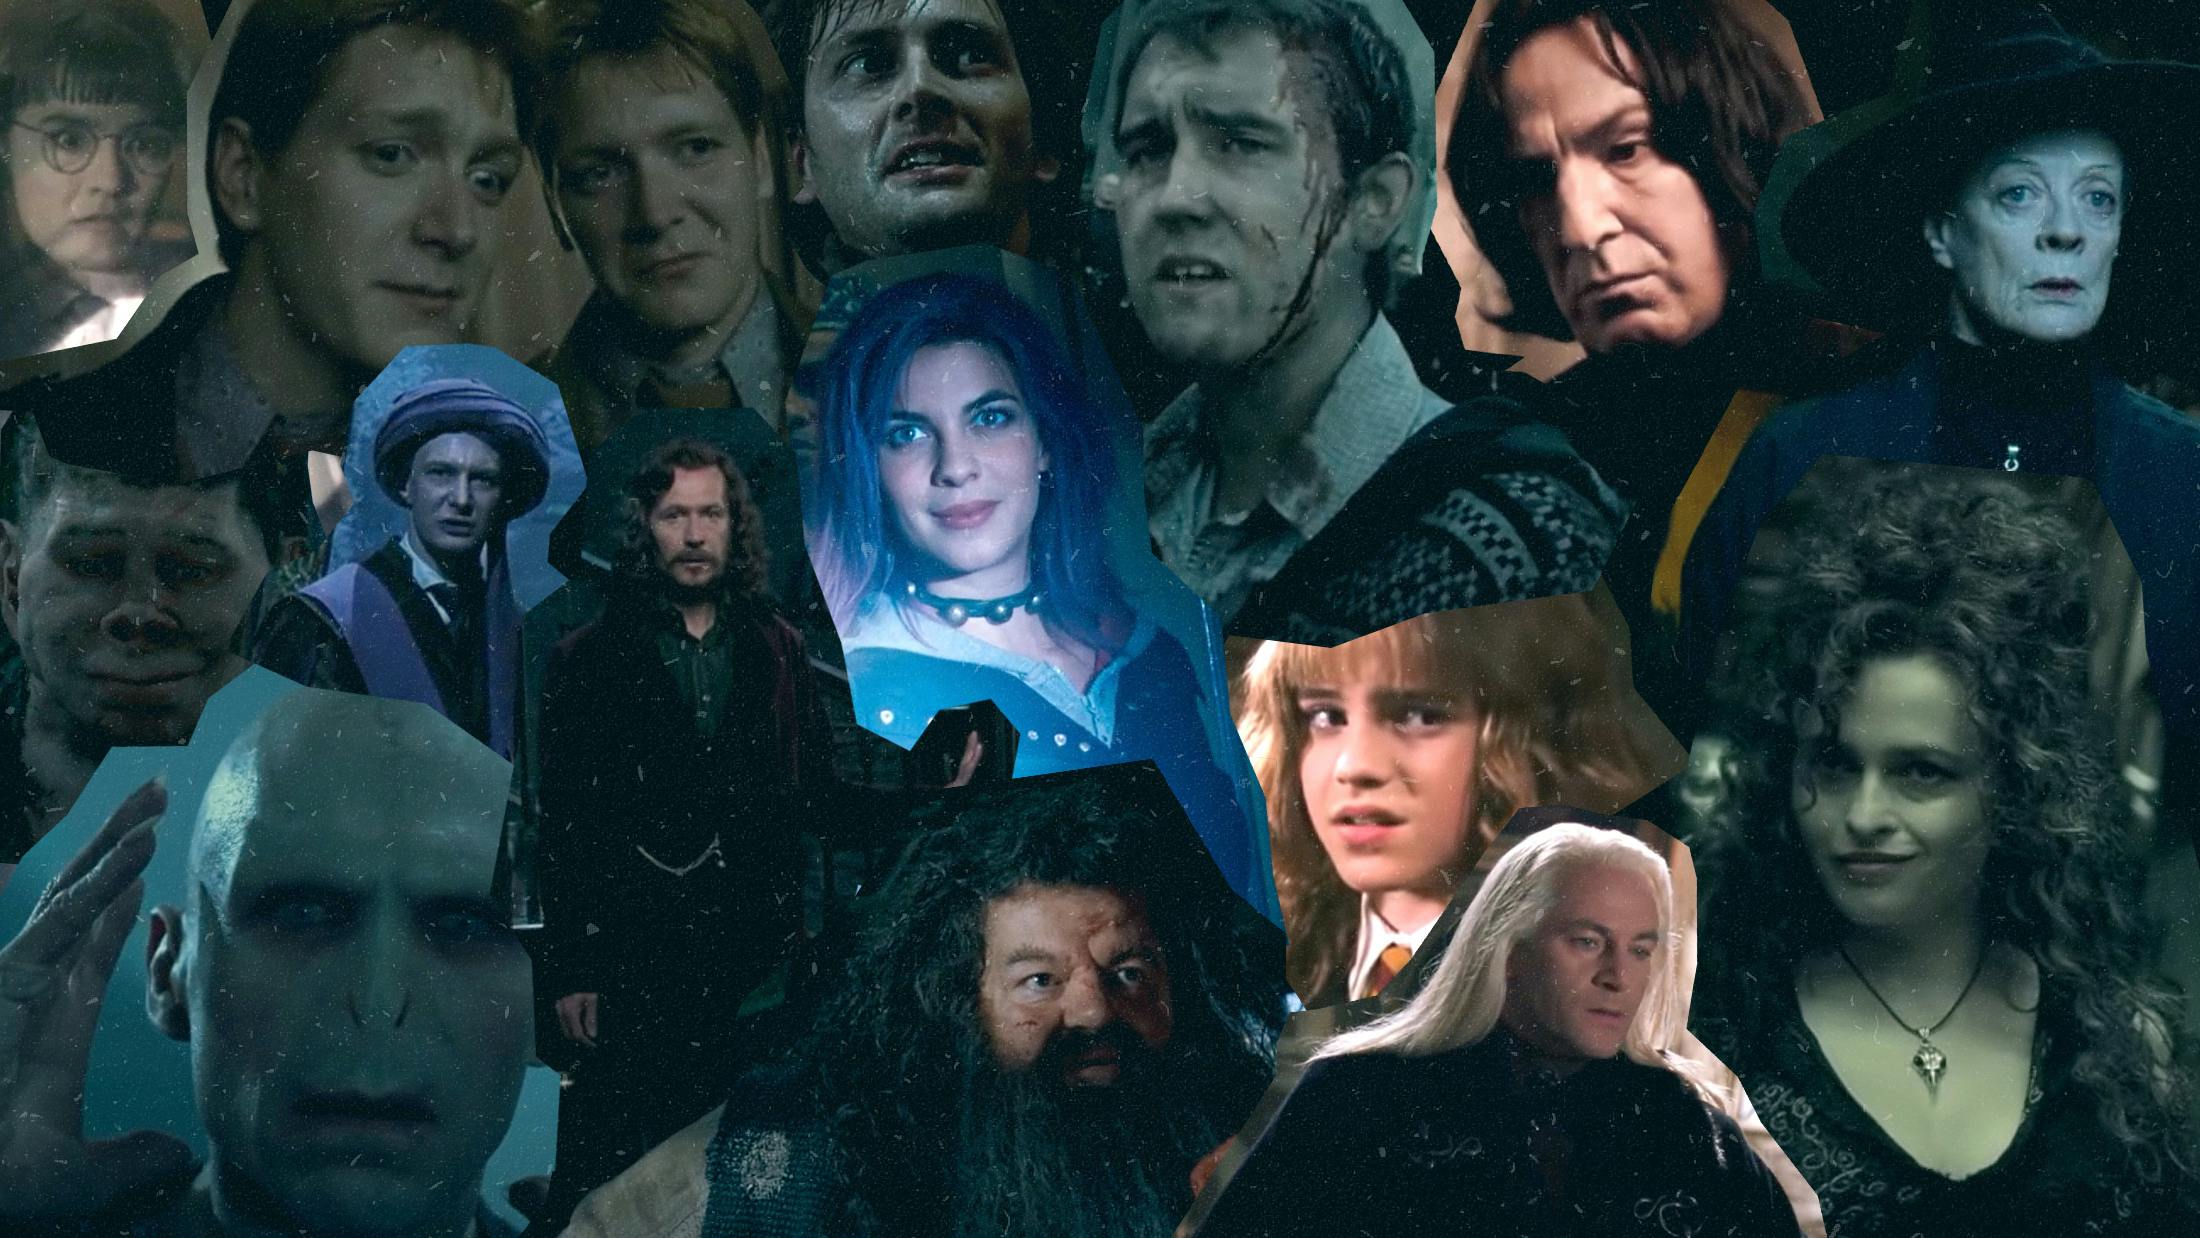 The 20 most metal Harry Potter characters – ranked